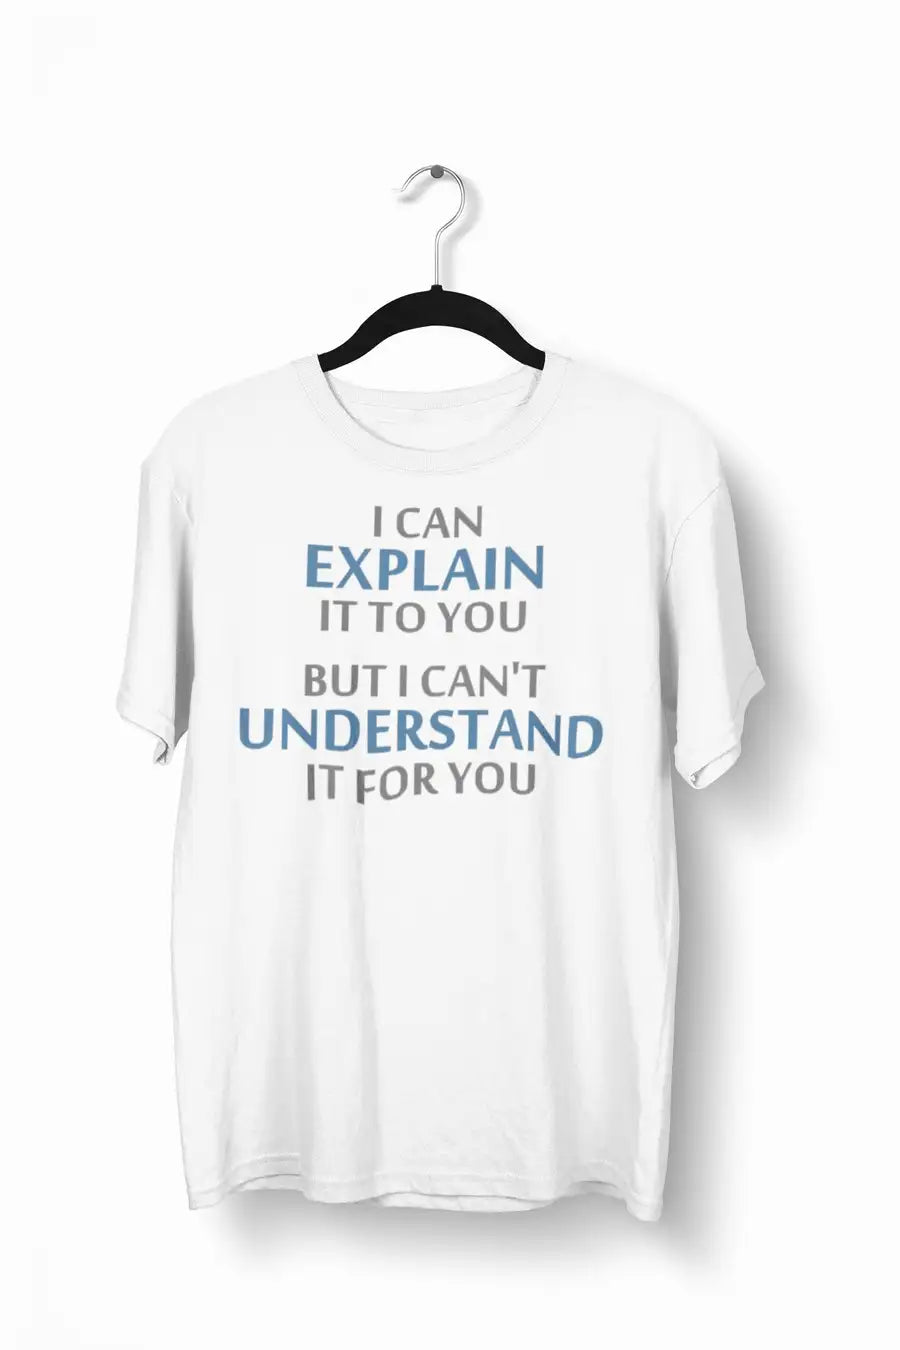 I Can Explain it to You White T shirt for Men | Premium Design | Catch My Drift India - Catch My Drift India Clothing clothing, engineer, engineering, made in india, shirt, t shirt, tshirt, w